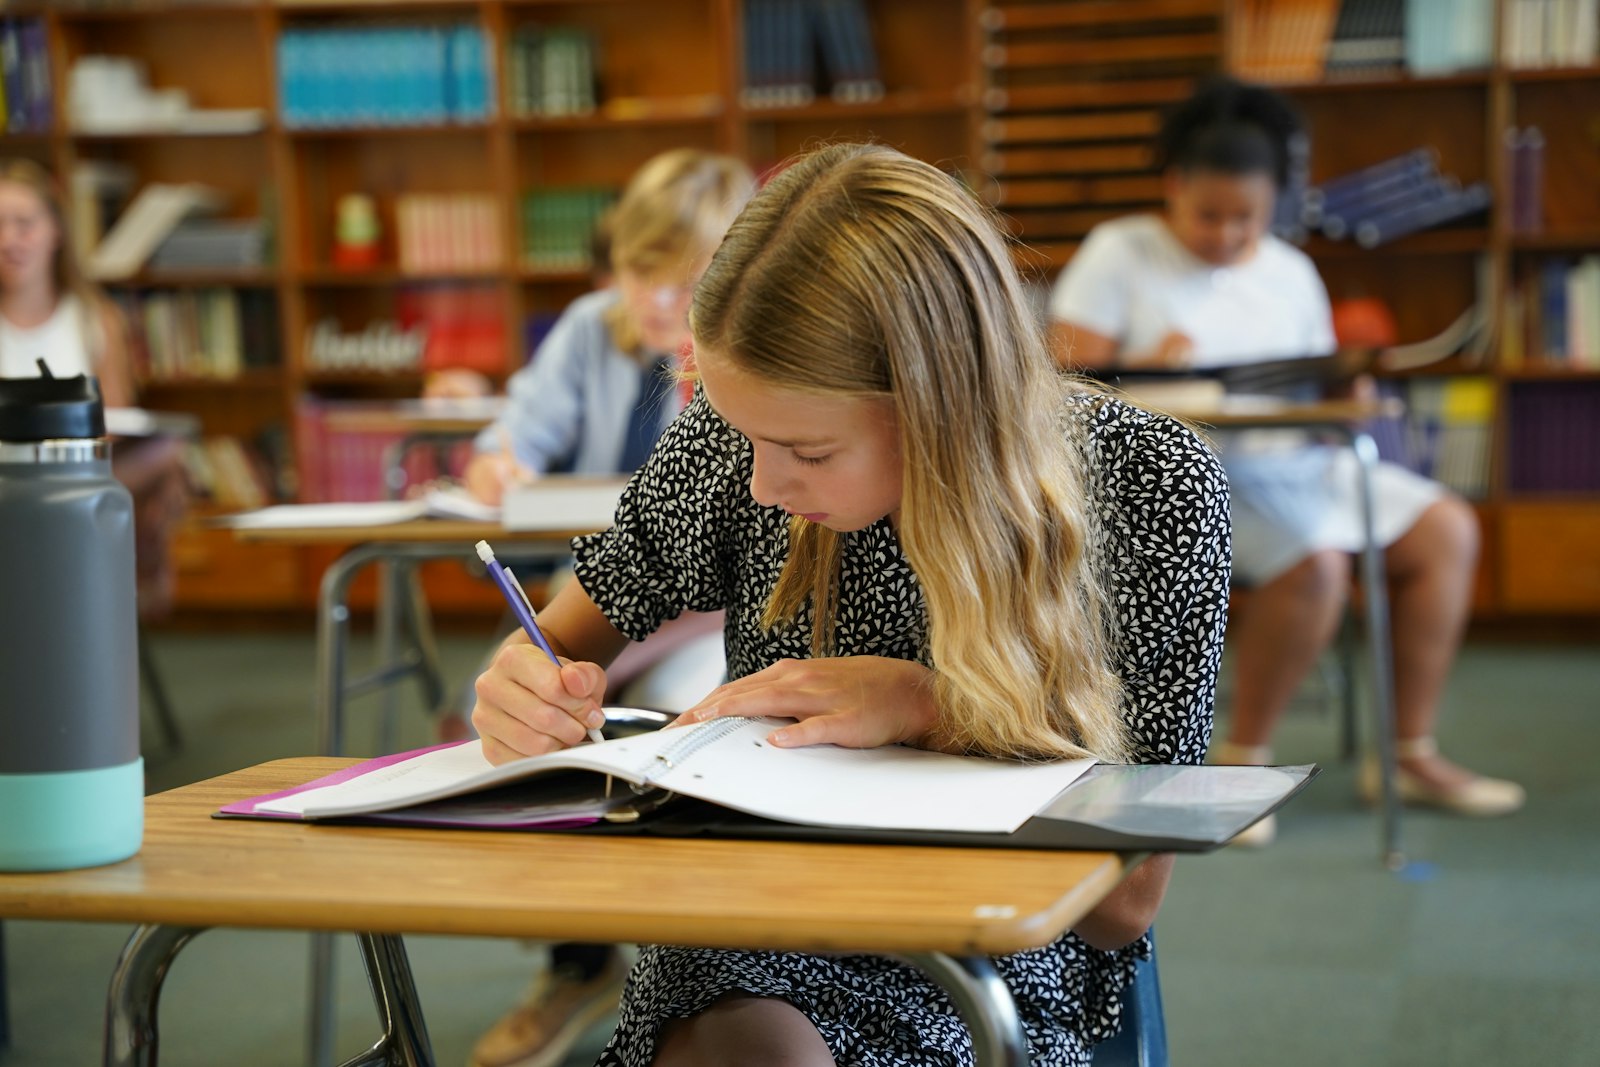 A young learner completes her assignment as part of St. Patrick School's new classical curriculum. The tight-knit rural community's support of St. Patrick School has allowed the school to thrive over the centuries, one of the longest-running Catholic schools in Michigan. (Daniel Meloy | Detroit Catholic)